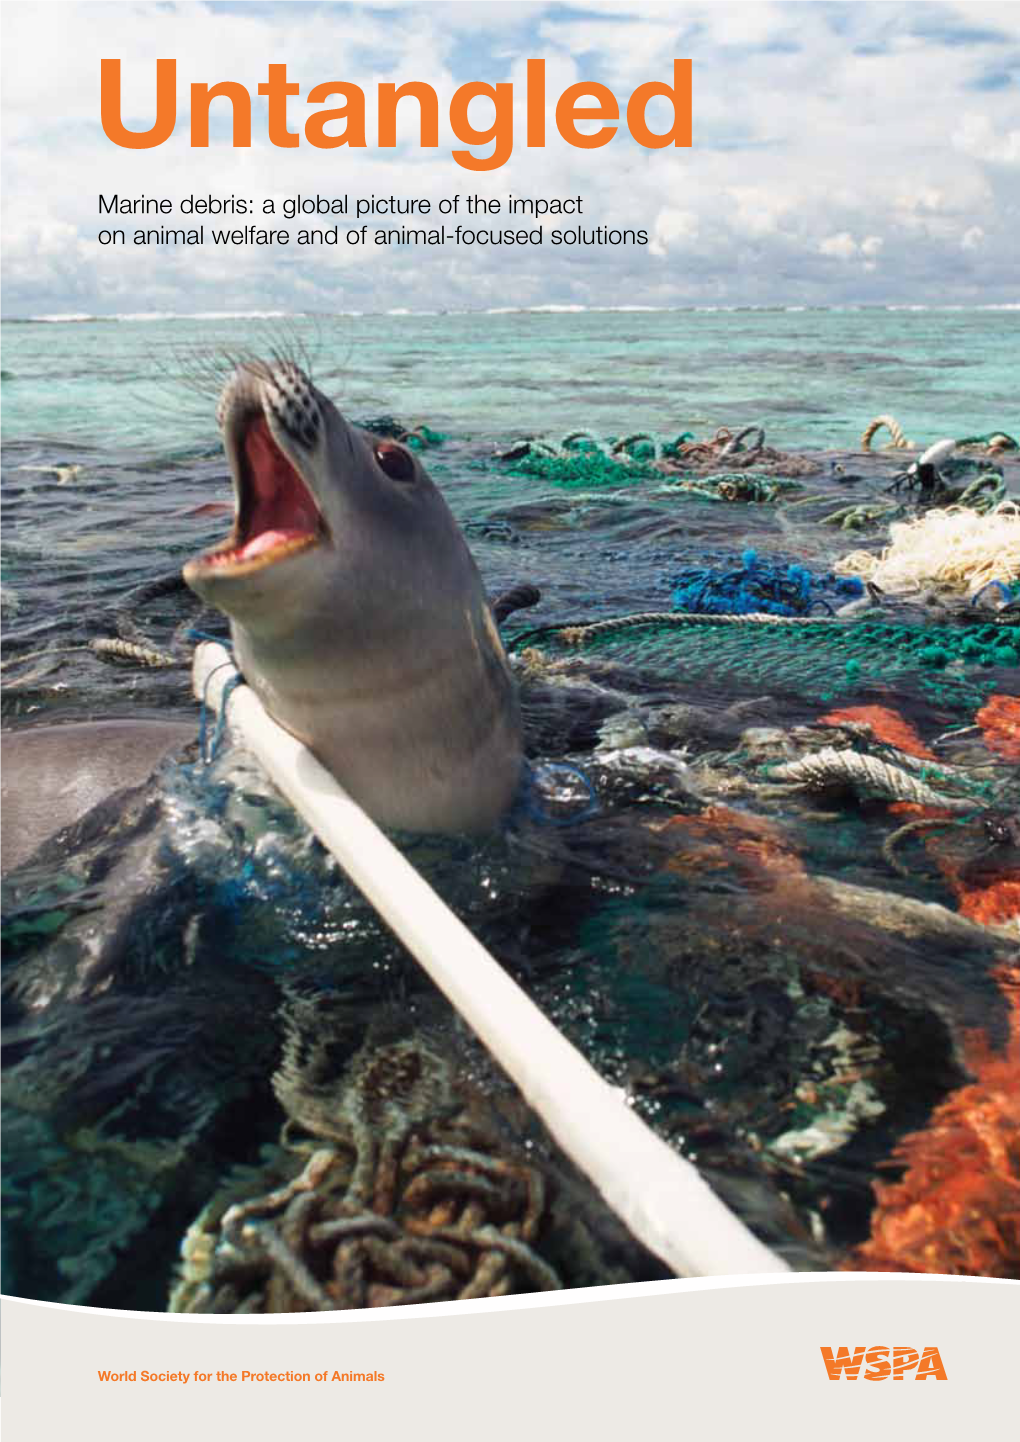 Marine Debris: a Global Picture of the Impact on Animal Welfare and of Animal-Focused Solutions